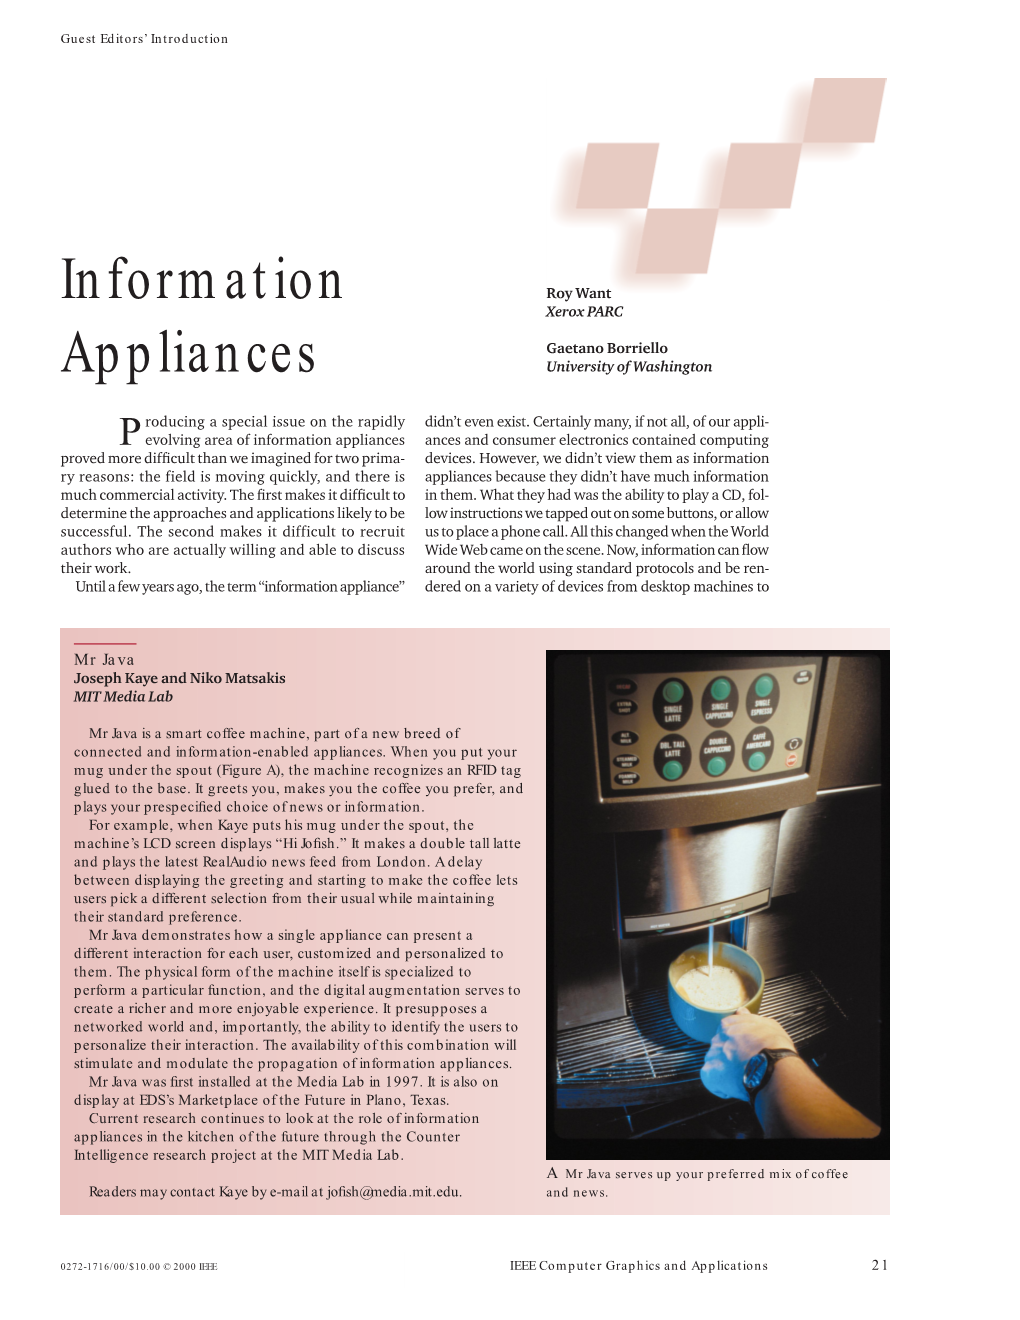 Information Appliances Ances and Consumer Electronics Contained Computing Proved More Difﬁcult Than We Imagined for Two Prima- Devices